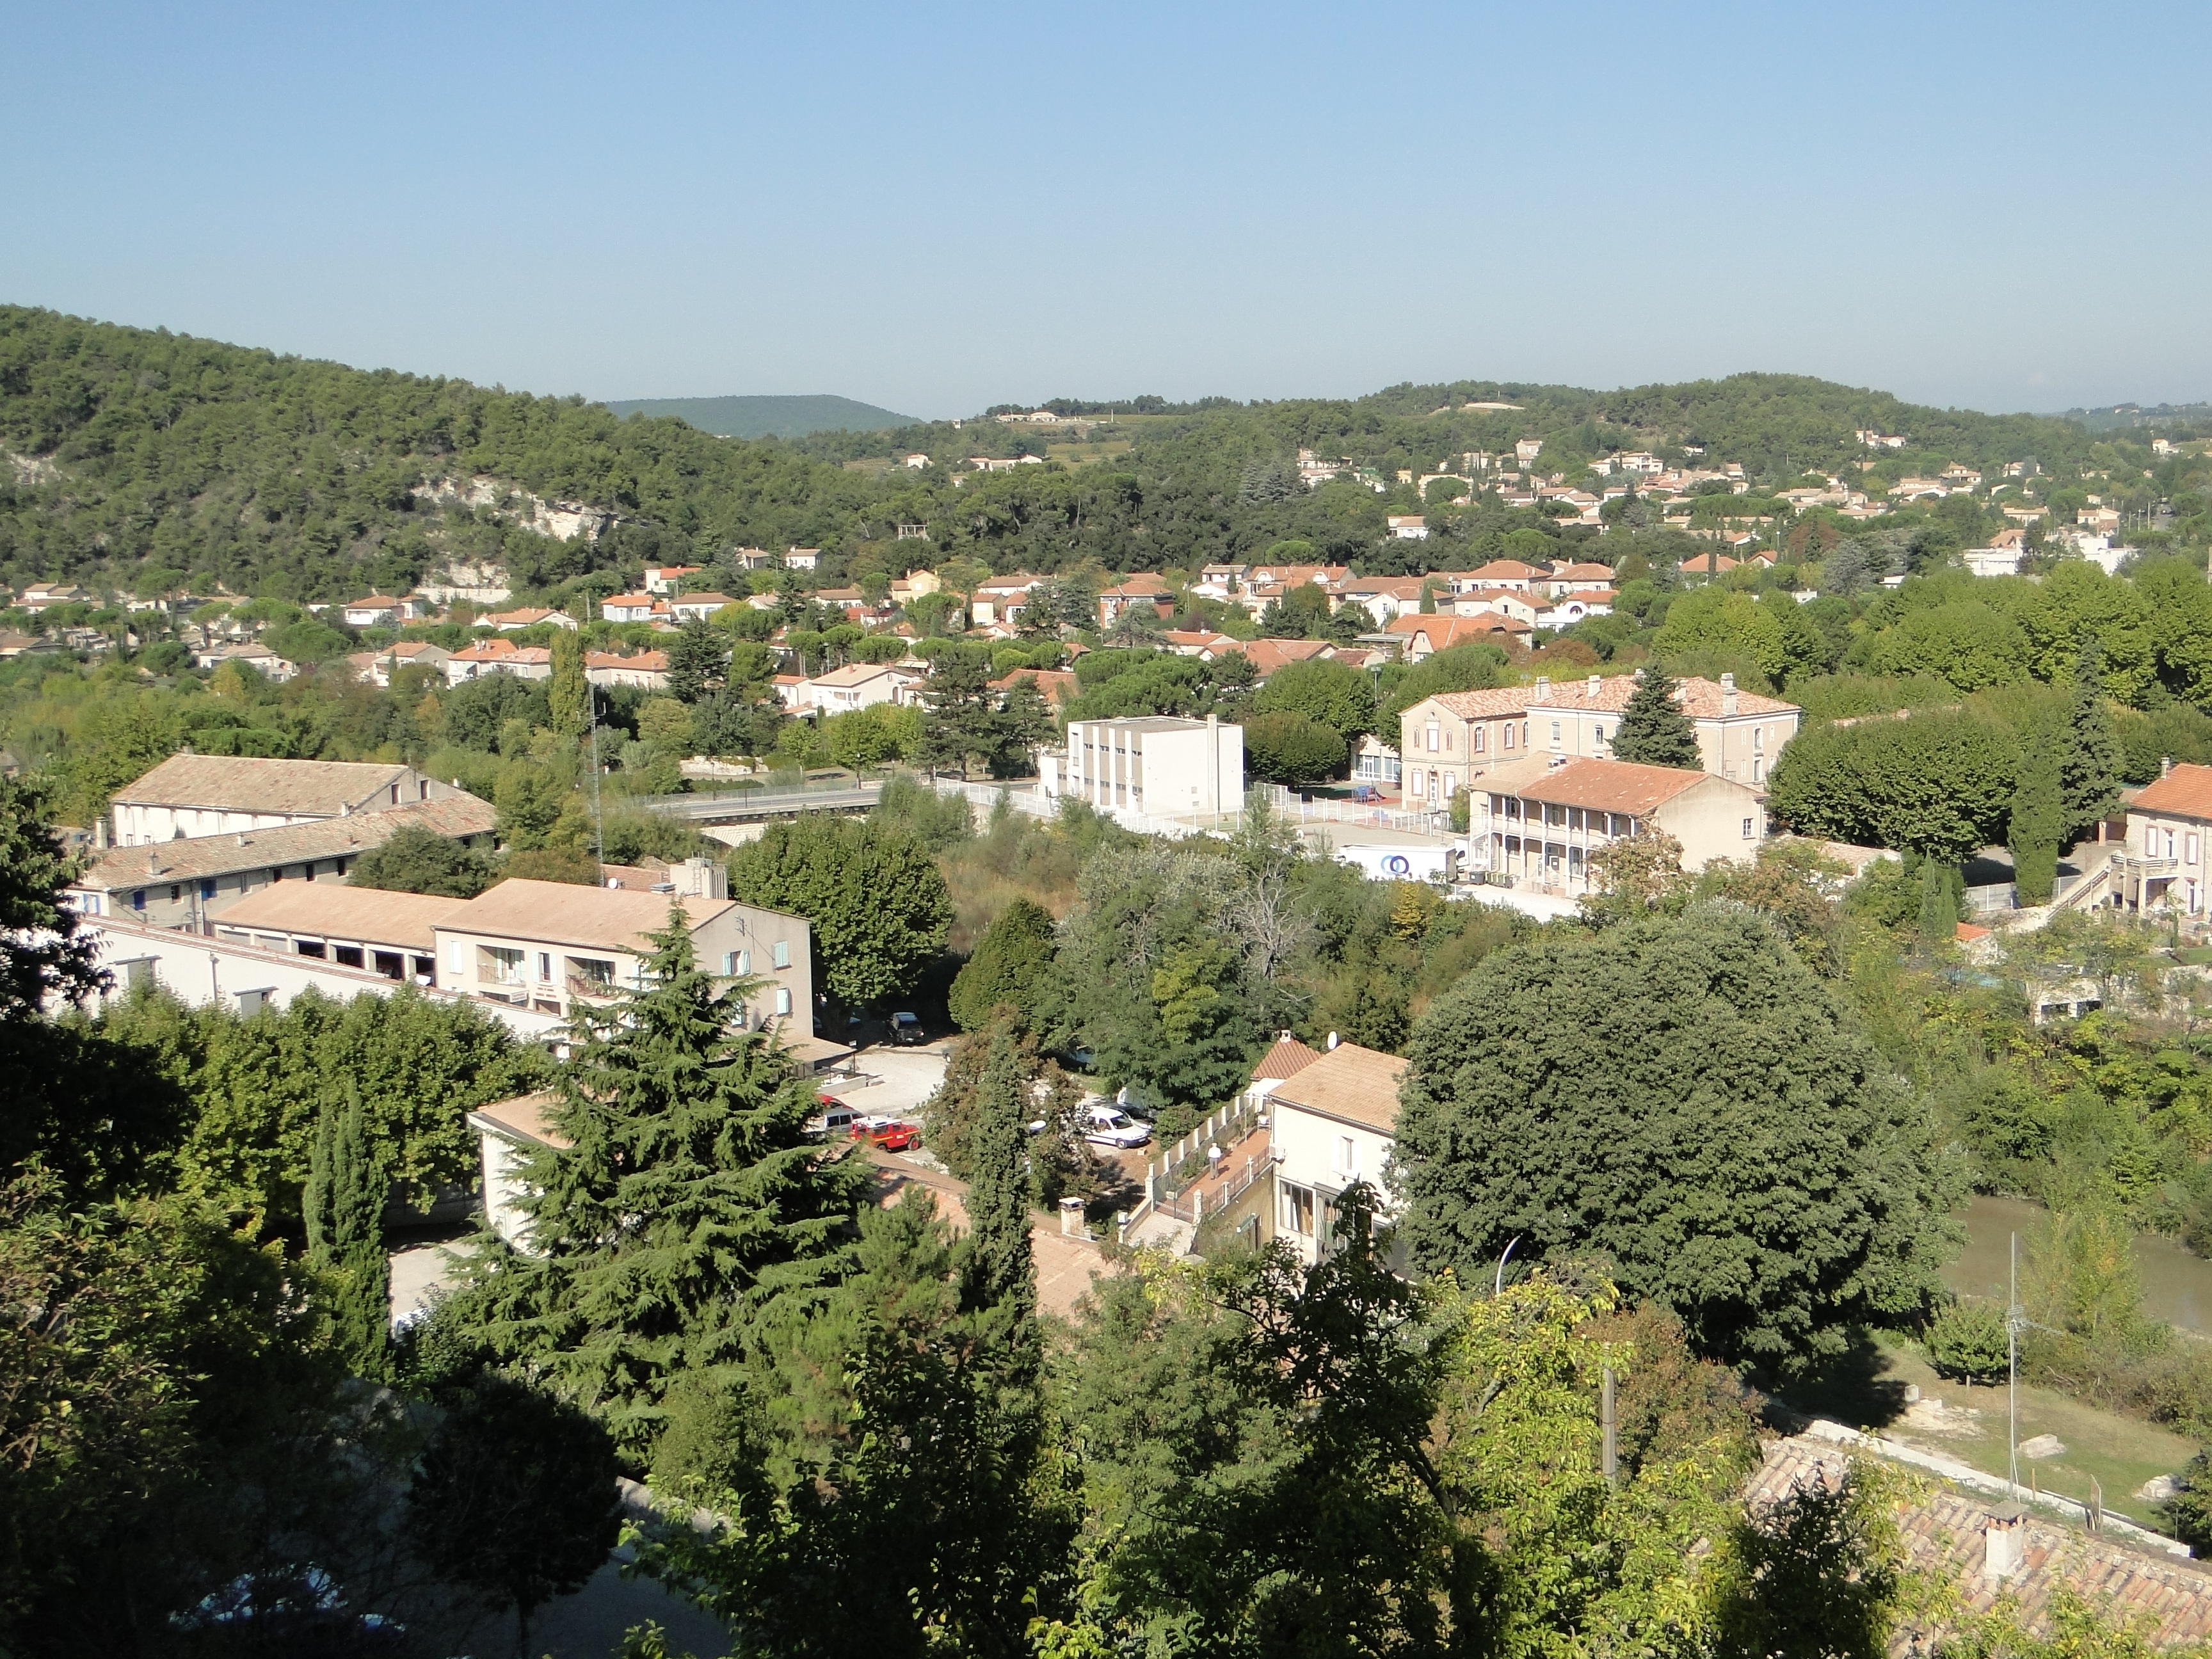 View of lower town from castle